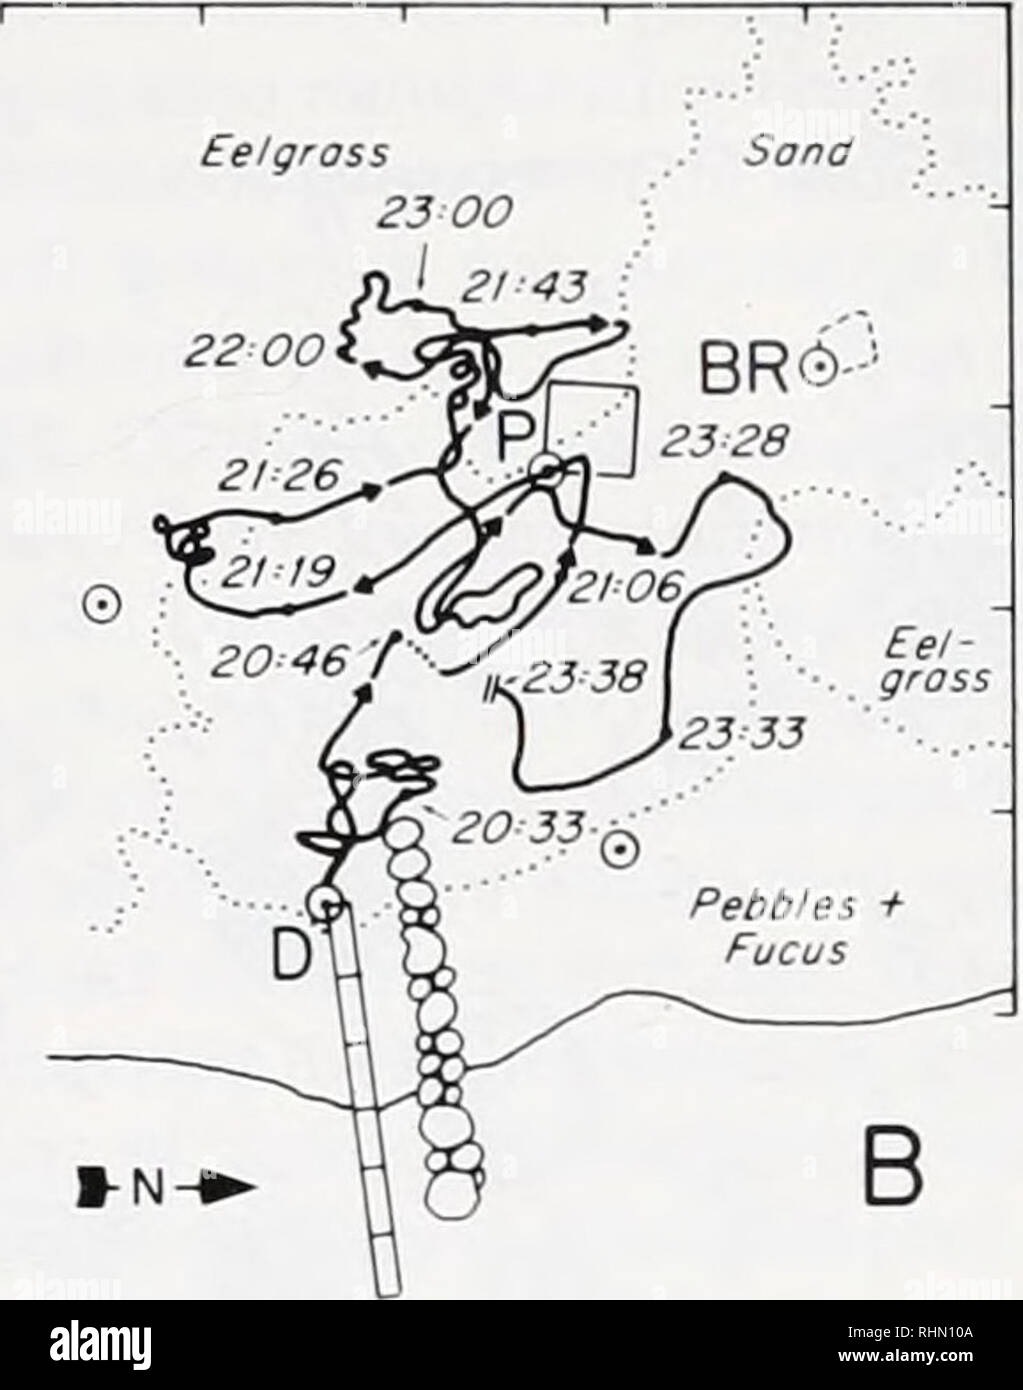 . The Biological bulletin. Biology; Zoology; Biology; Marine Biology. B Figure 1. Detail of the field site map showing homing tracks of two lobsters, both stable residents of shelters near BR. A. On 7 September, a 56-mm CL male was released at the dock (D) at 23:24 h; he returned home (near BR) in 2 h, 12 min and remained there for at least 8 min, when observations were terminated; he continued to use his home shelter for several more weeks. B. On 16 September, a 51-mm CL female was released at D at 20:28 h; she did not return home (near BR) in the observation time (3 h, 10 min), but was found Stock Photo